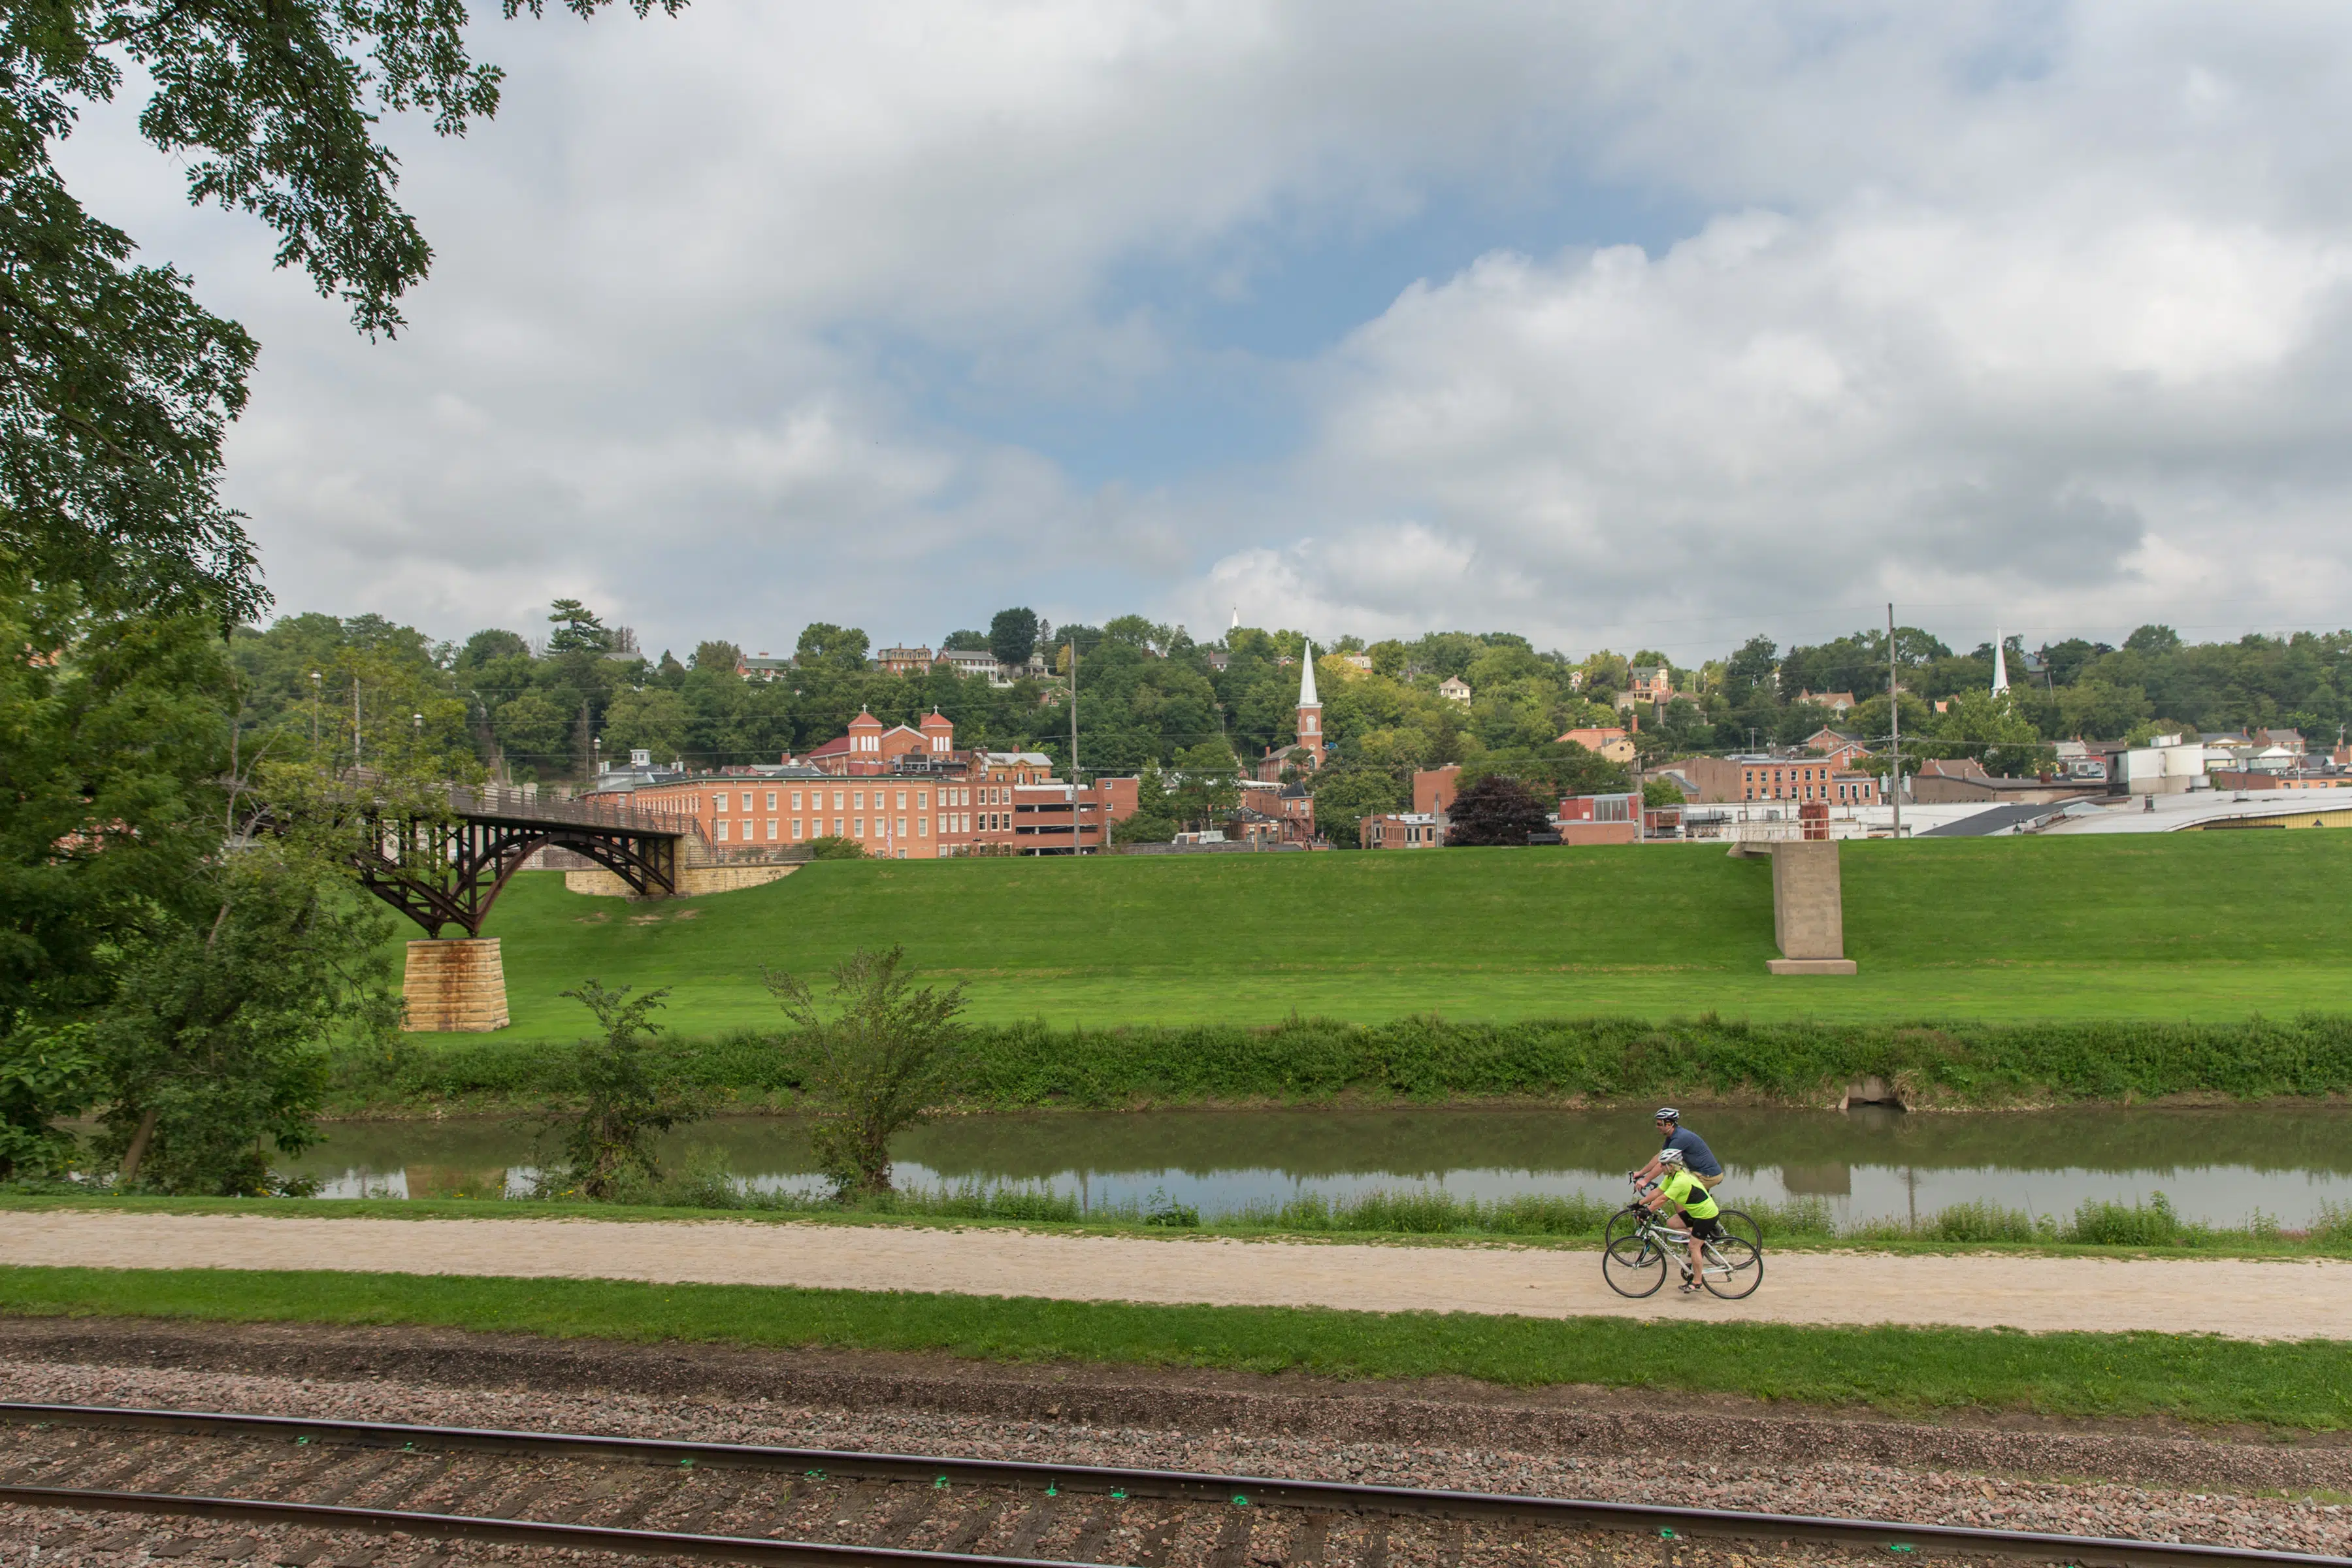 Biking along the Galena River Trail is one of our favorite things to do in Galena IL